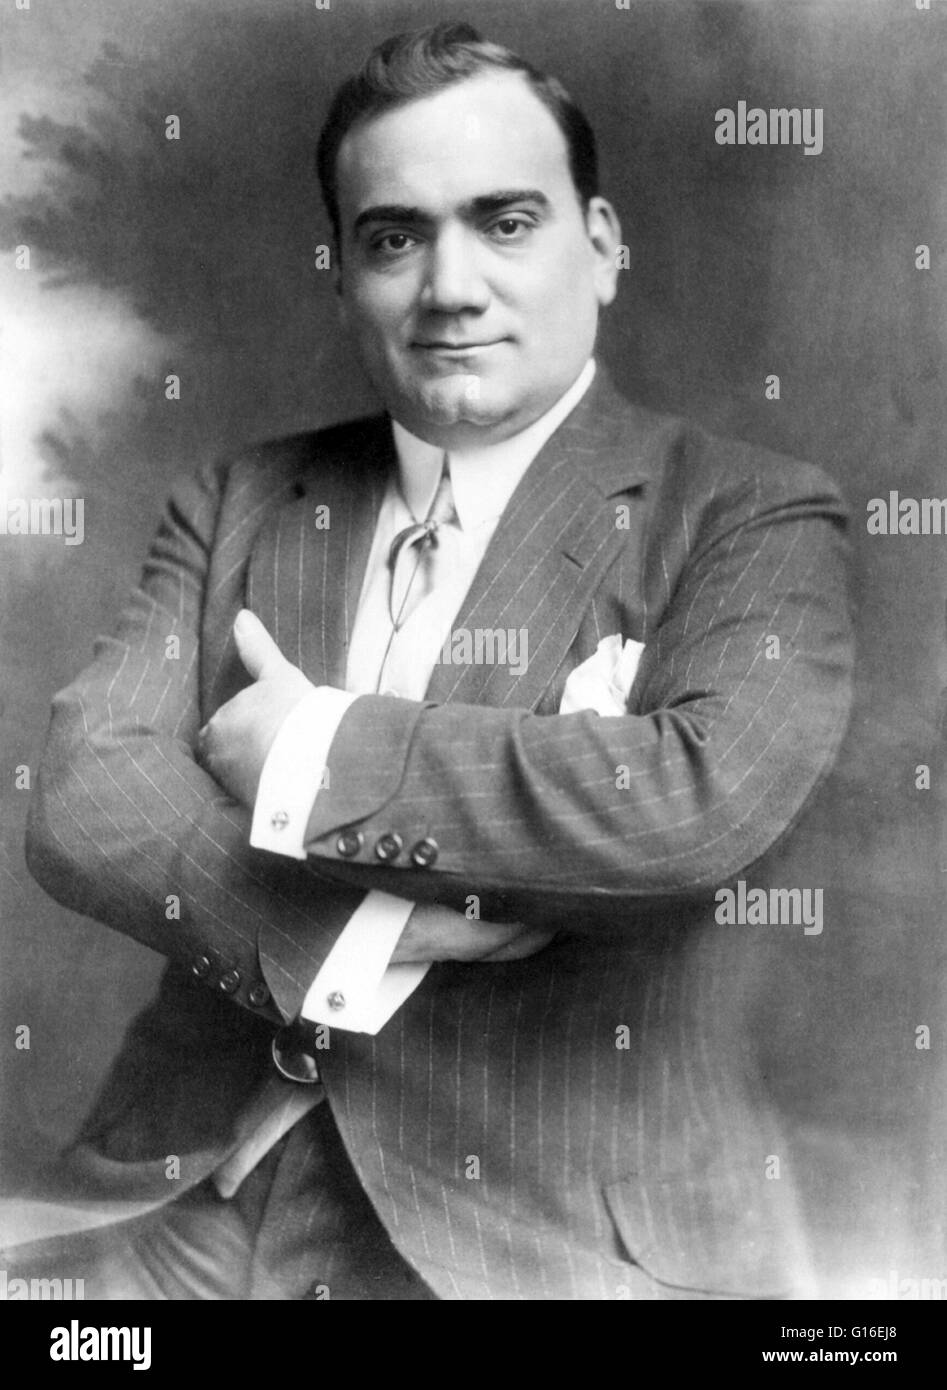 Enrico Caruso (February 25, 1873 - August 2, 1921) was an Italian operatic tenor. He sang to great acclaim at the major opera houses of Europe and the Americas, appearing in a wide variety of roles from the Italian and French repertoires that ranged from Stock Photo